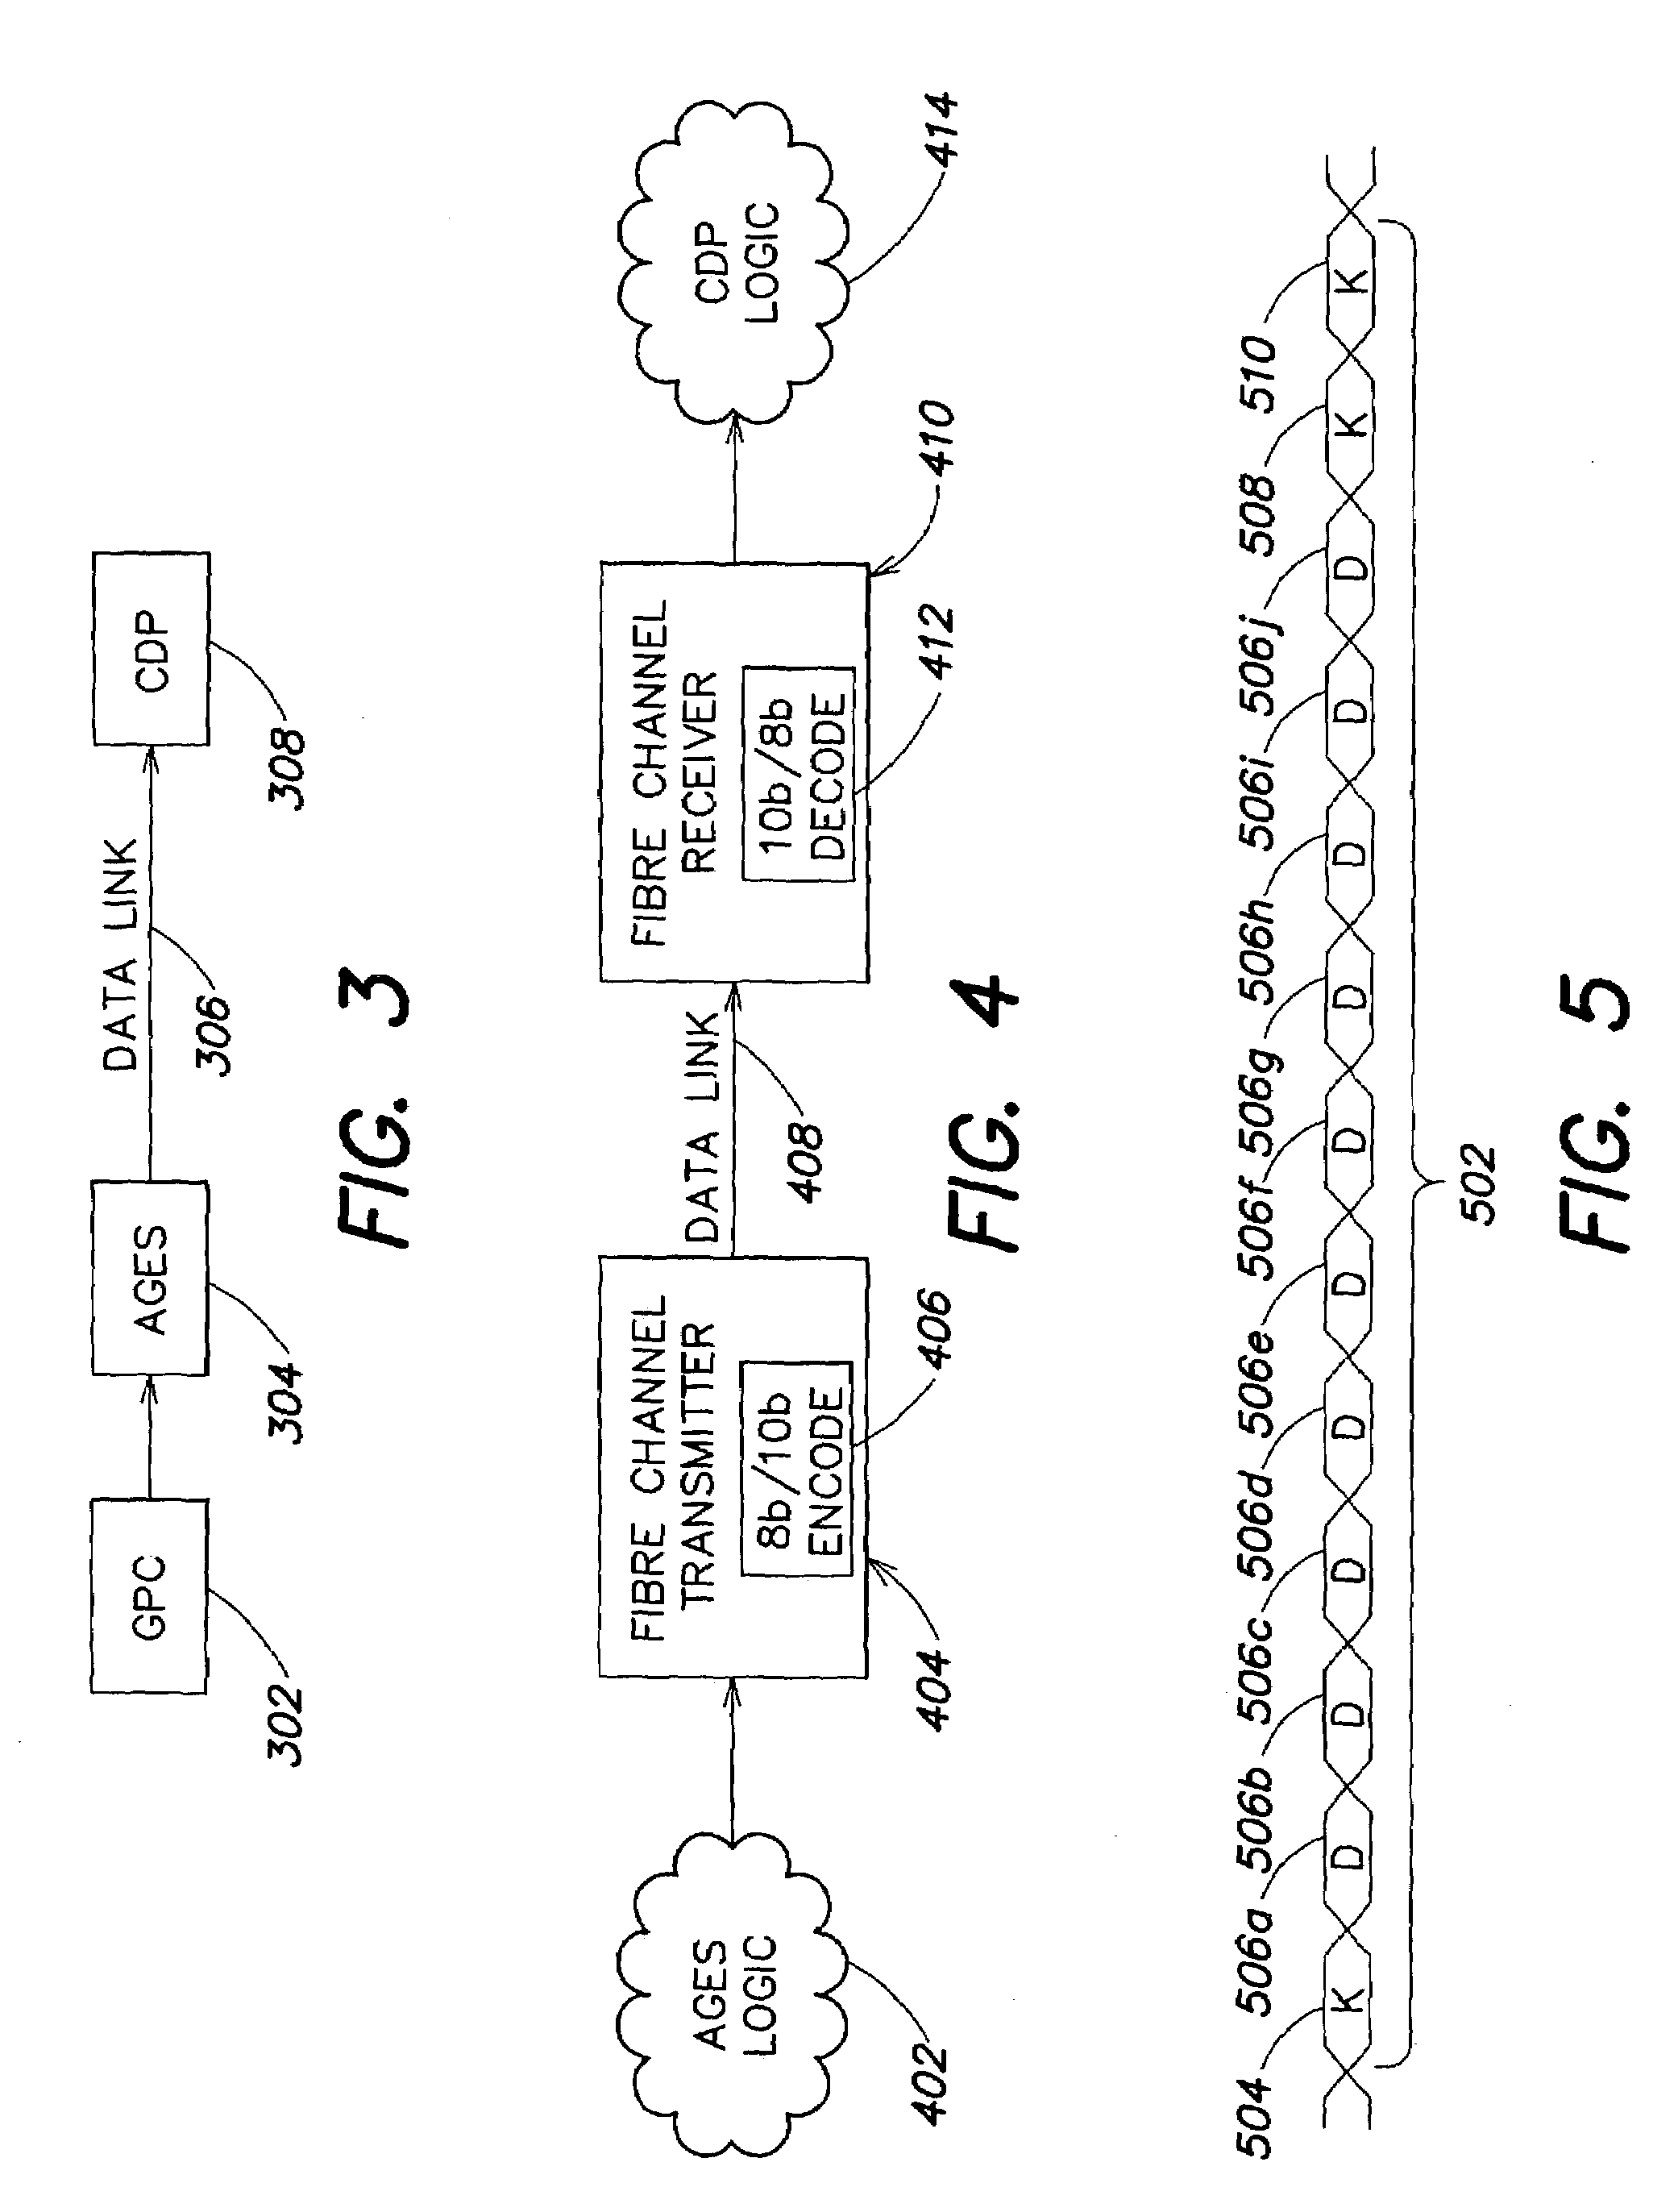 System and method for transferring data on a data link